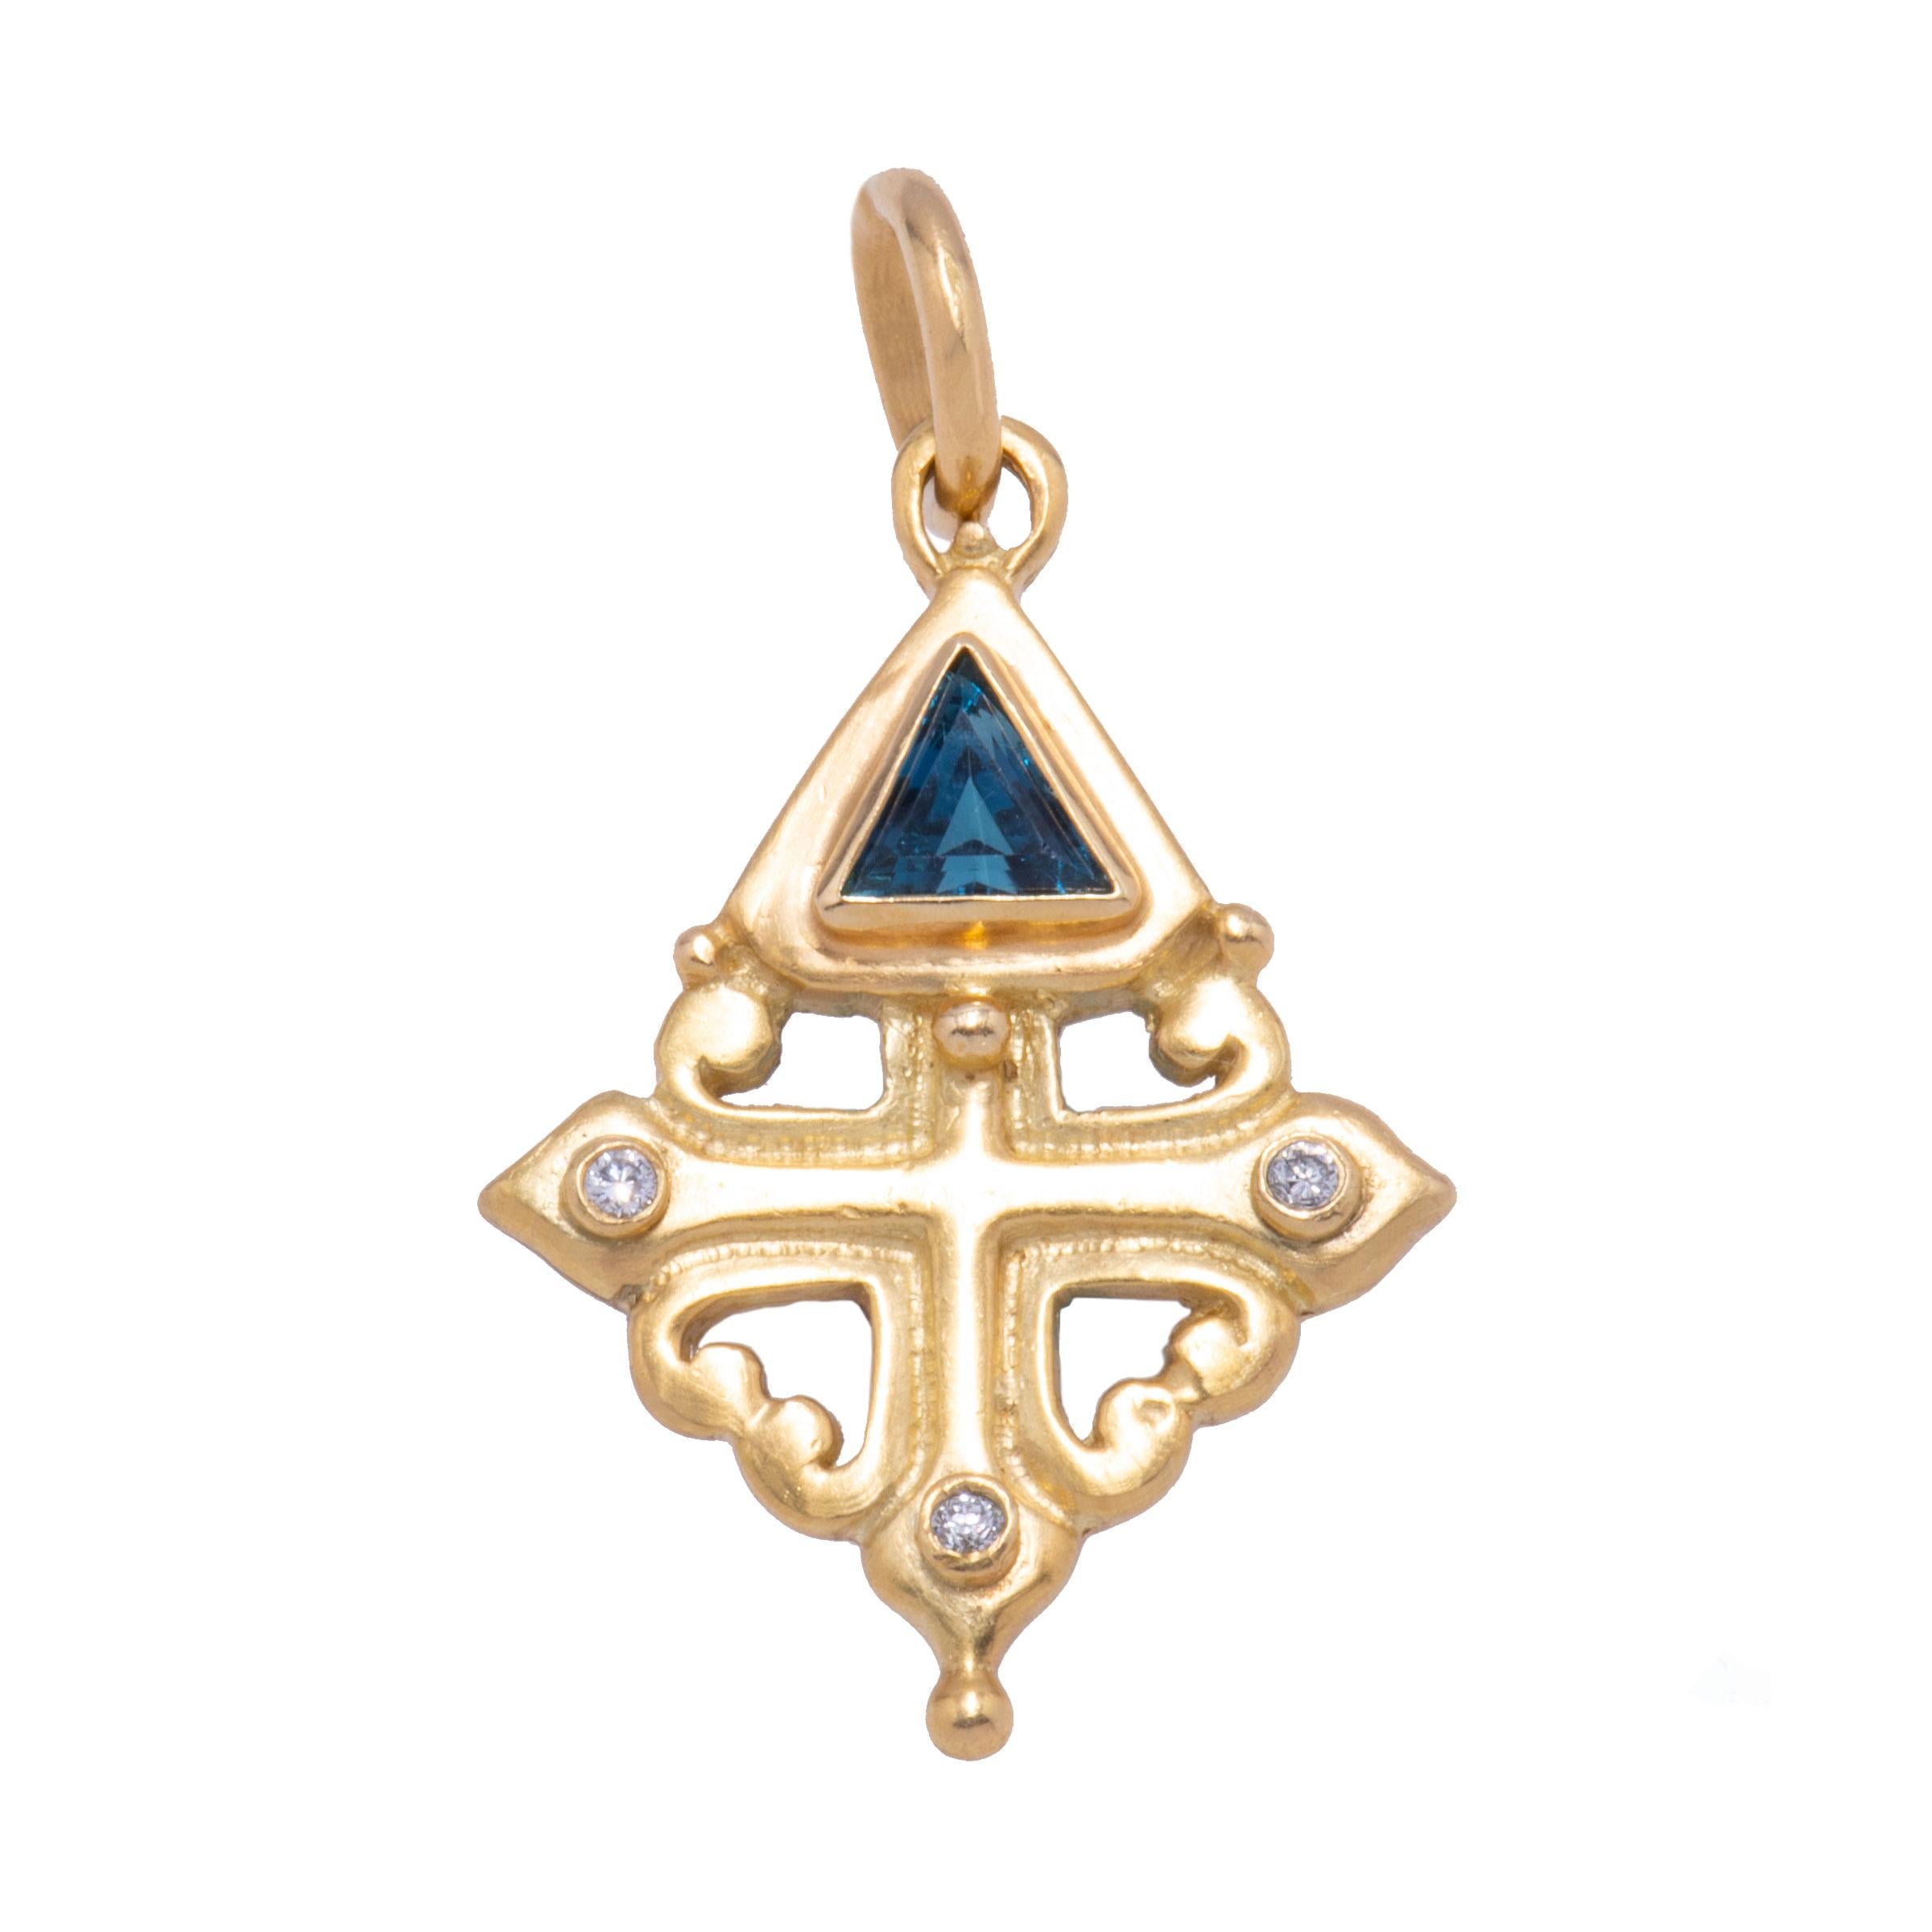 Sophia's Cross Pendant in 18 karat gold takes a cue from Medieval and Byzantine designs. The inner cross is topped with diamonds and a magnificent teal blue/green tourmaline is a bezel set triangle. Knights of the Templar? A great queen of yore? A